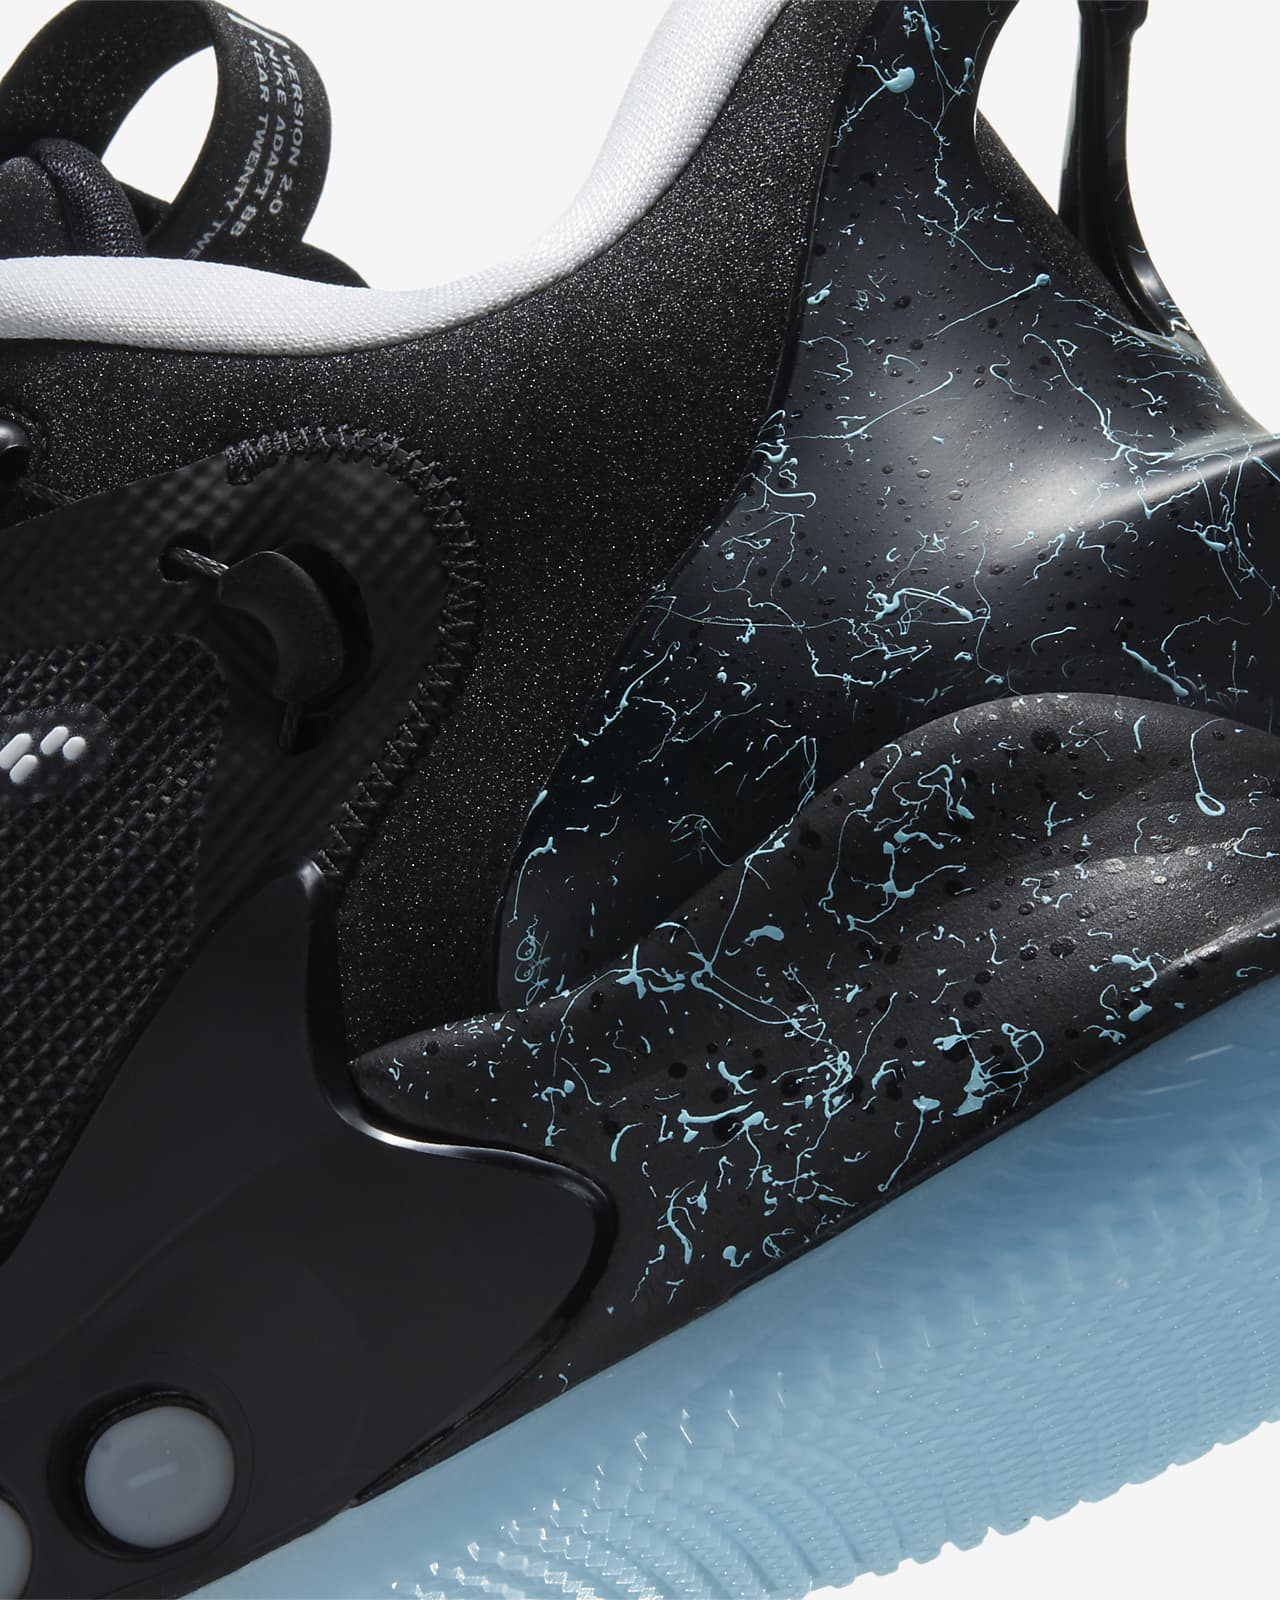 where to buy the nike adapt bb